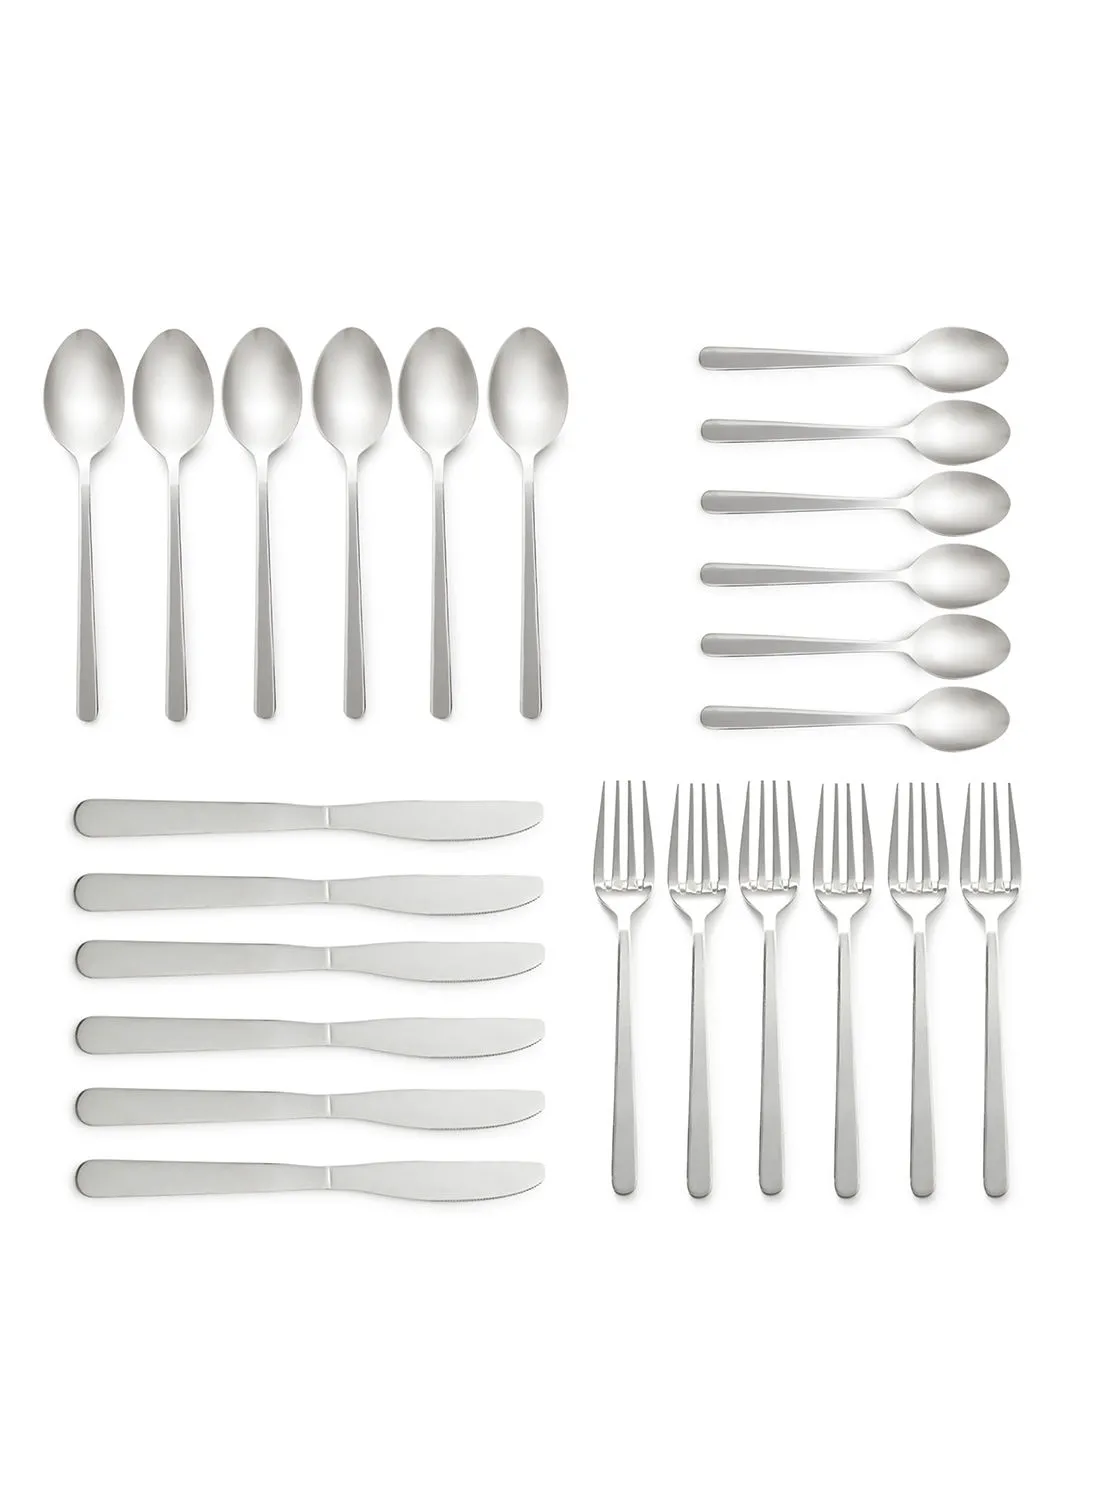 noon east 24 Piece Cutlery Set - Made Of Stainless Steel - Silverware Flatware - Spoons And Forks Set, Spoon Set - Table Spoons, Tea Spoons, Forks, Knives - Serves 6 - Design Silver Sail